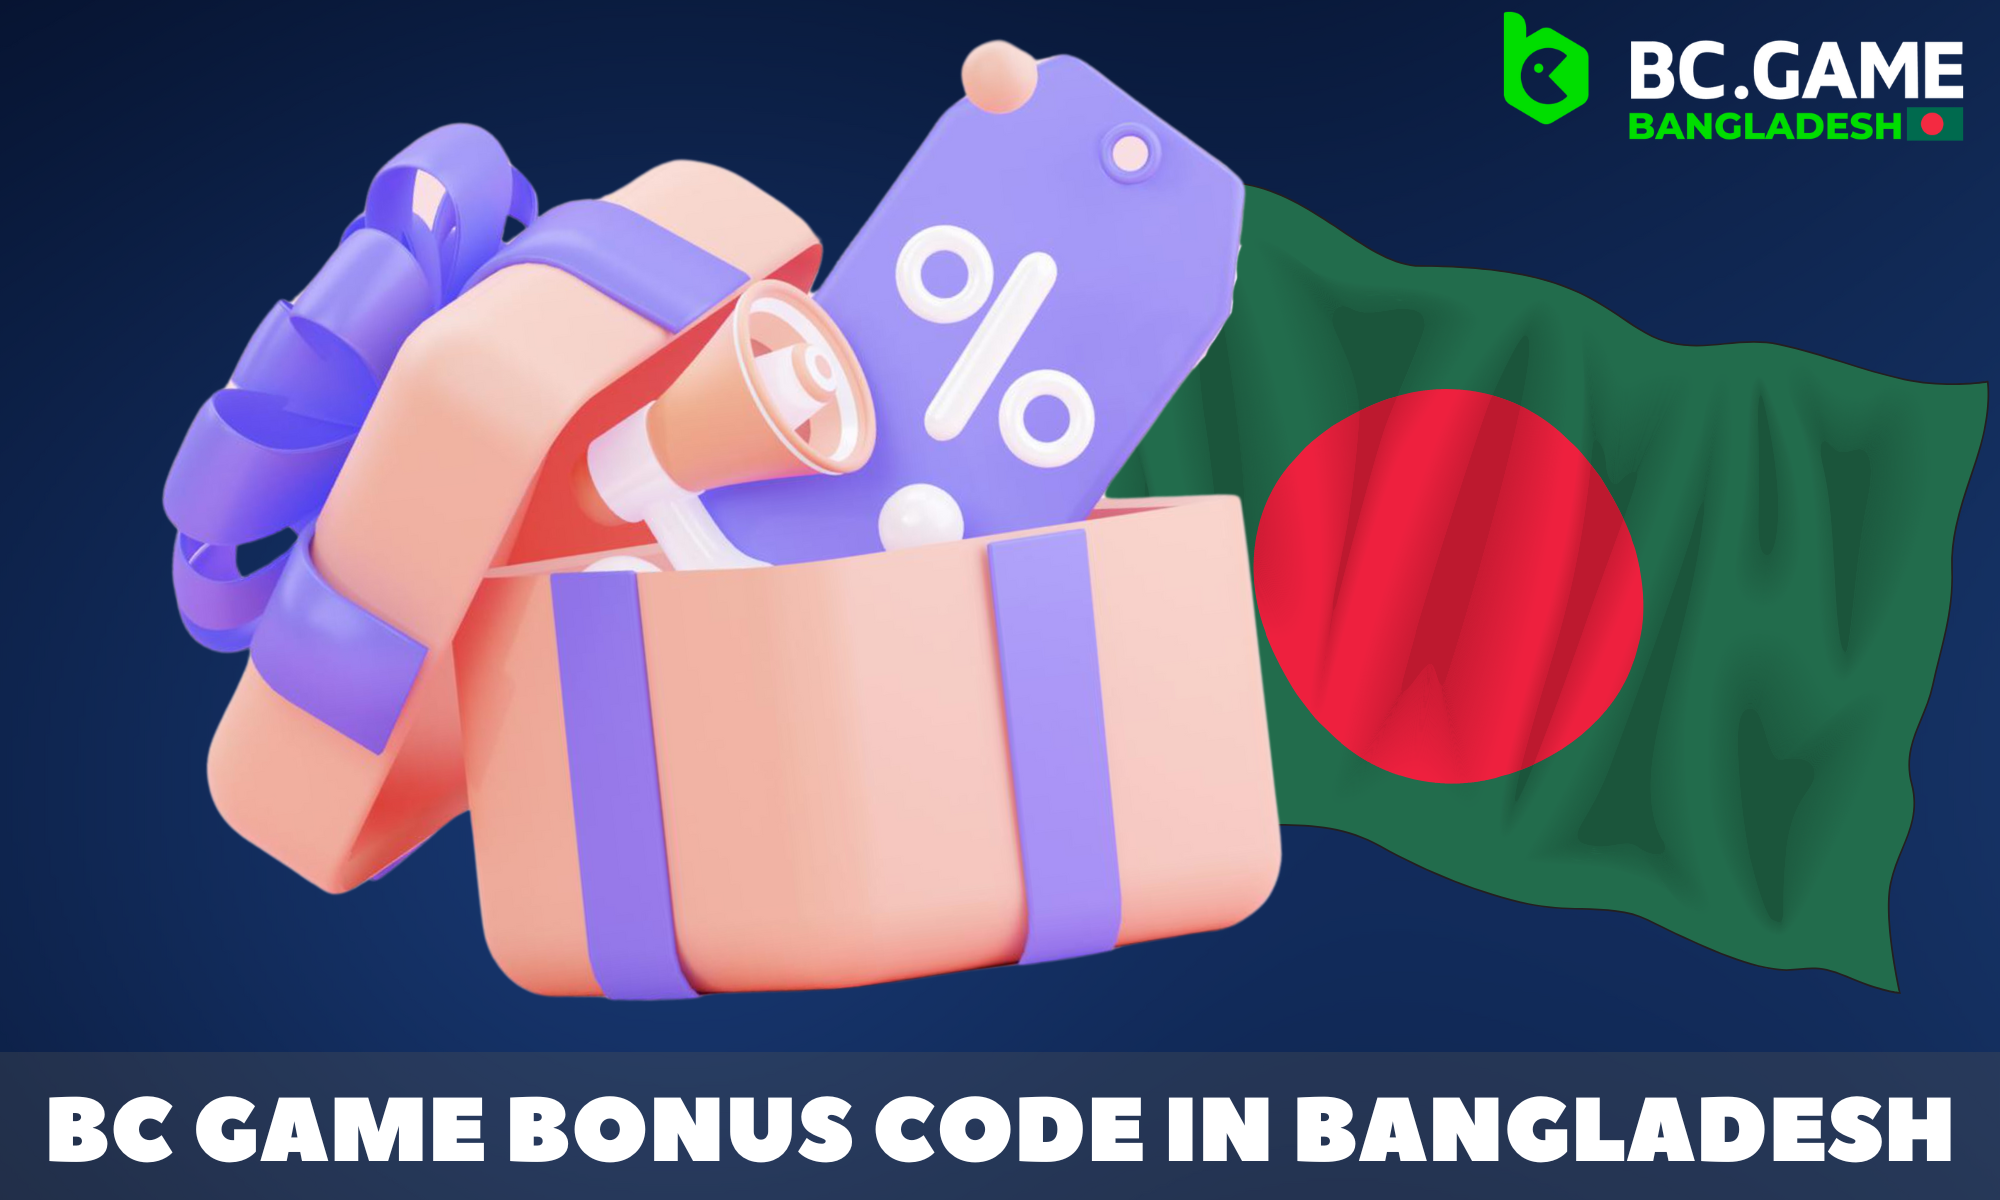 BC Game Casino has introduced a special bonus code for activation on the website